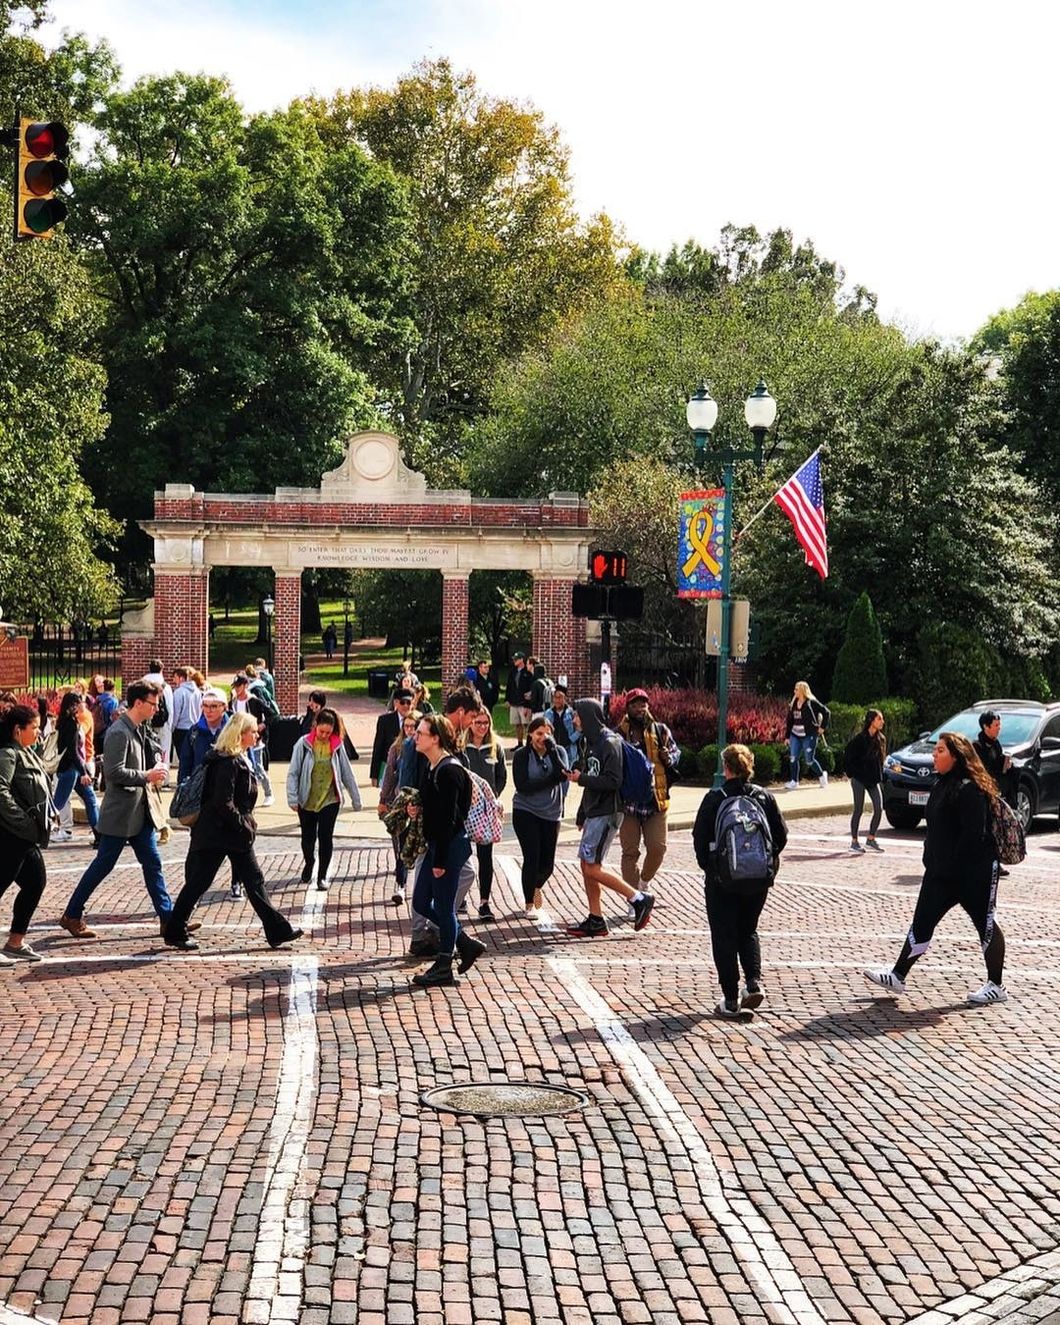 7 Things You Think While Seeing  Prospective Student Tour Groups On Campus